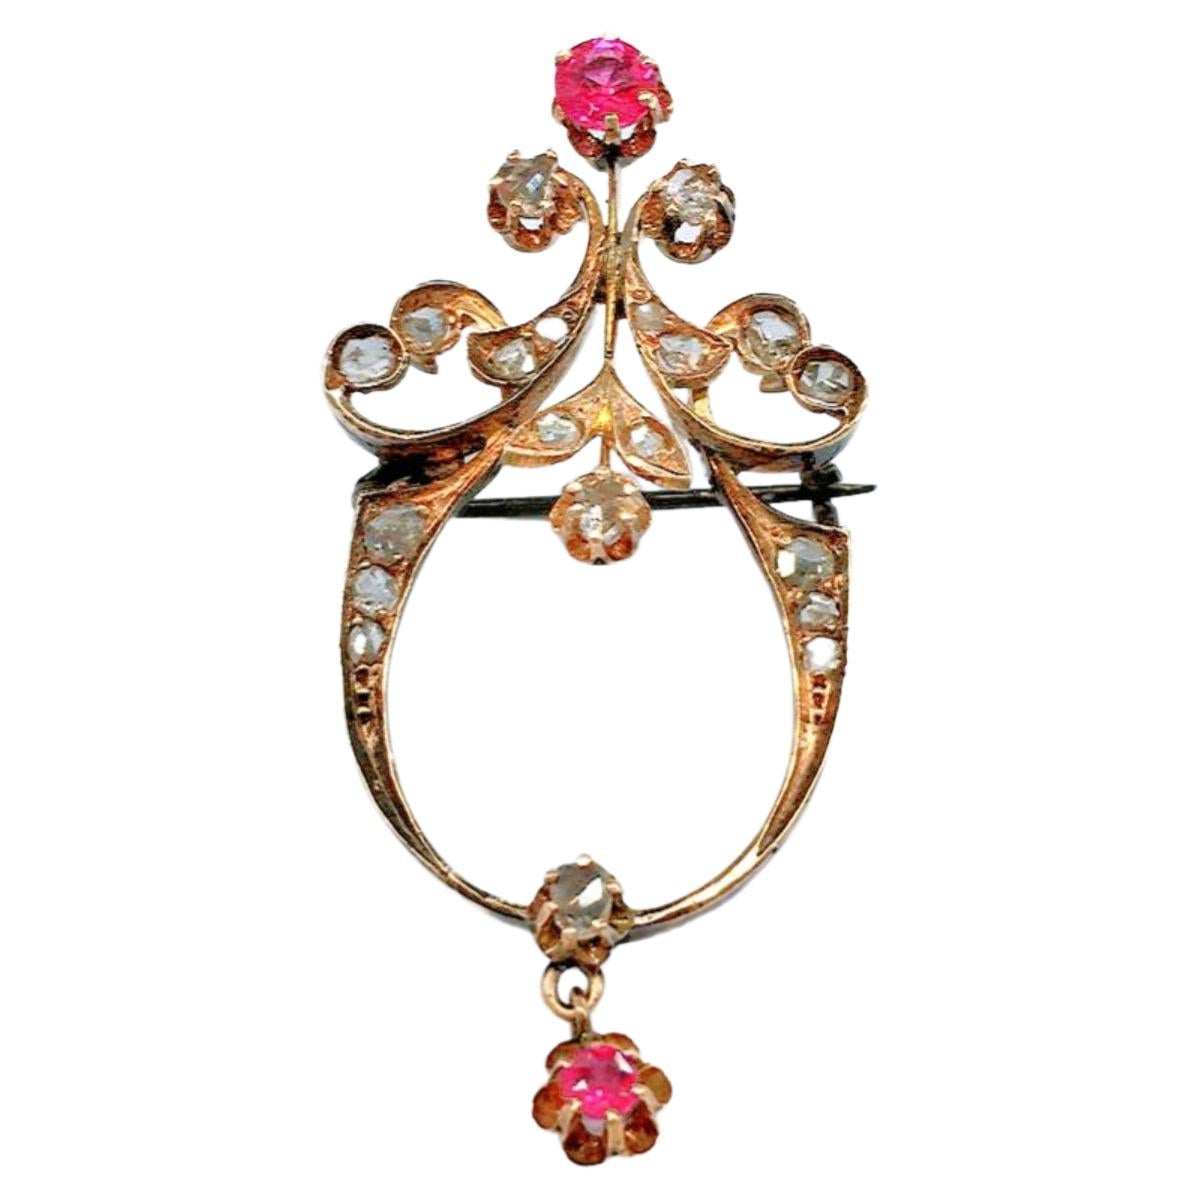 Antique 14k gold brooch in artnovo style with rose cut diamonds and ruby brooch was made during the imperial russian era 1907.c hall marked 56 imperial russian gold standard and cacouse assay mark